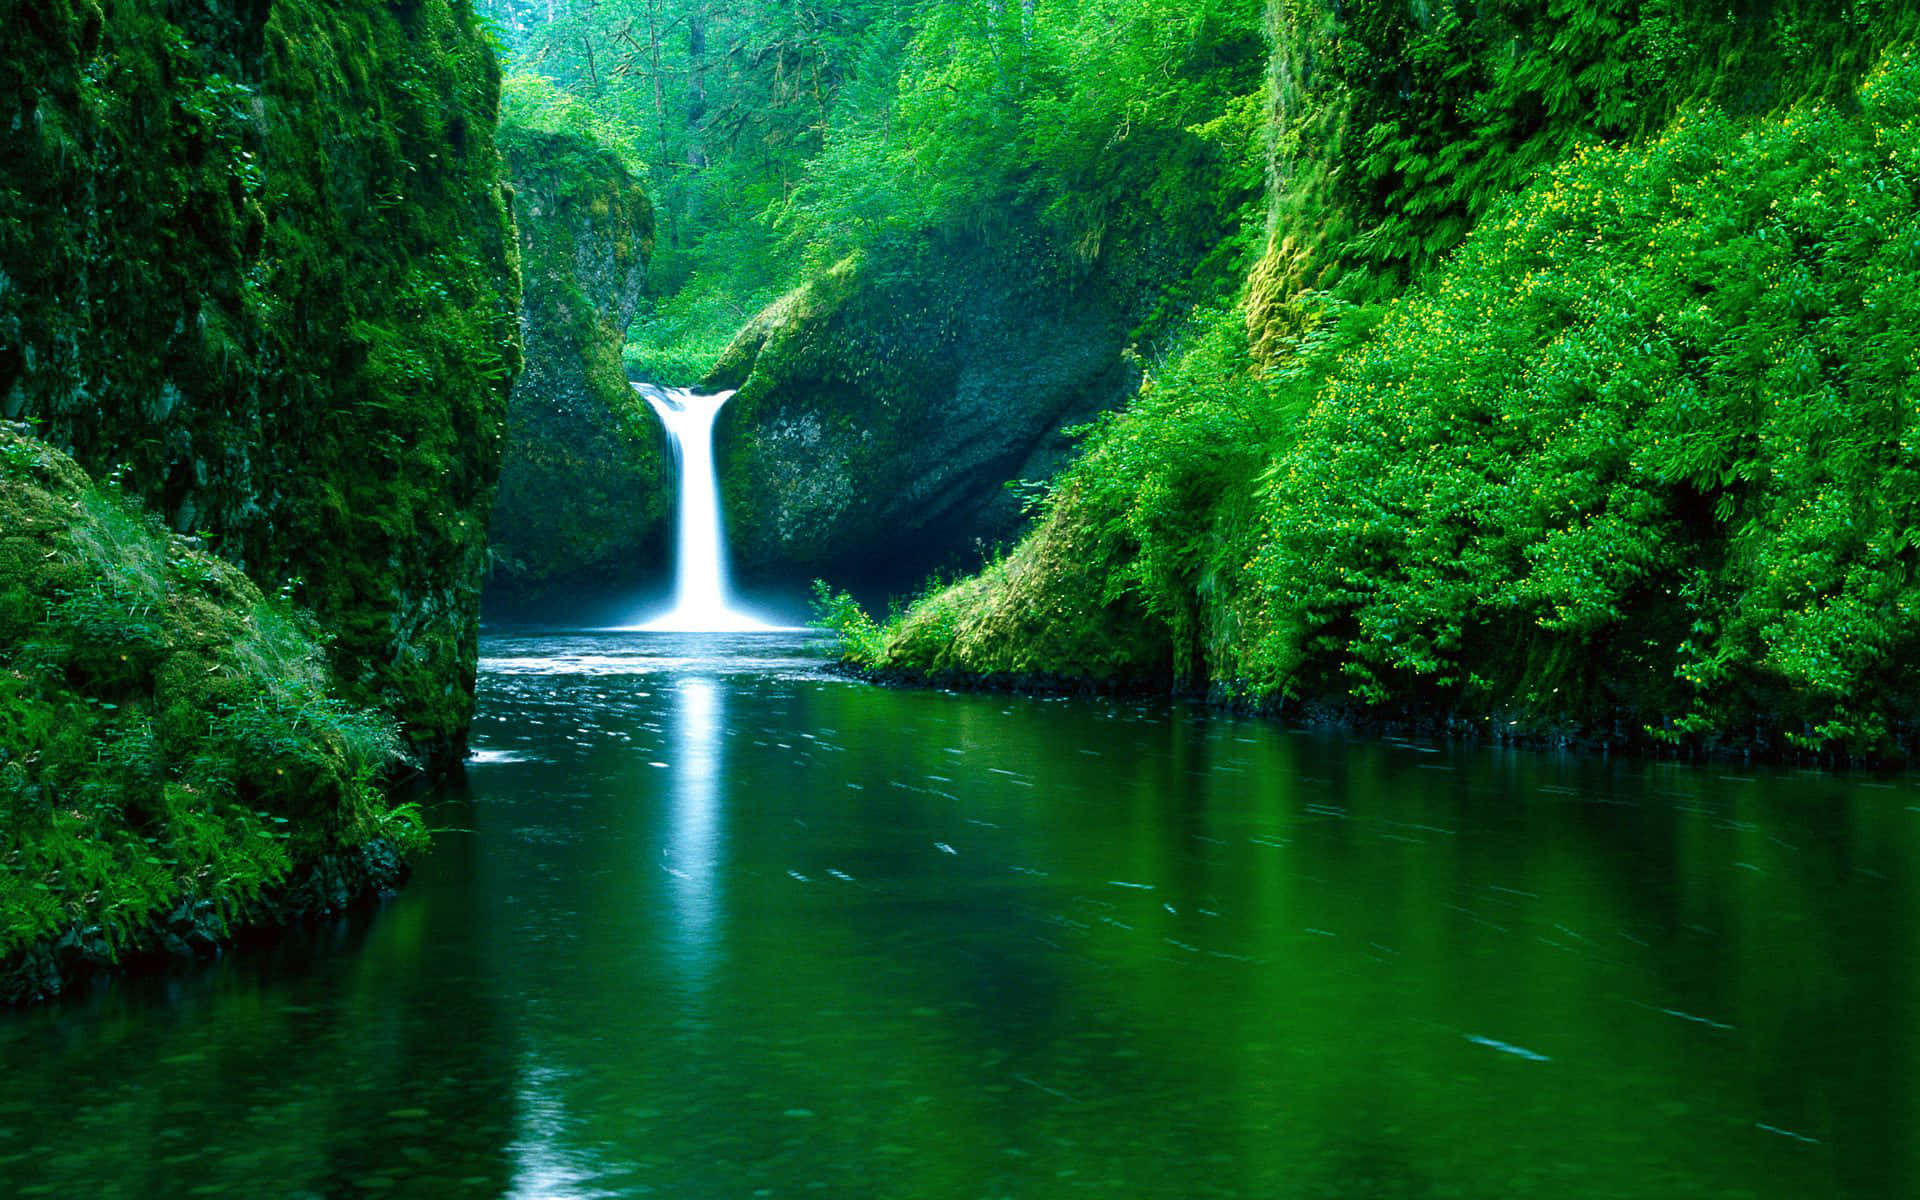 Enjoy a peaceful view of nature as you take a boat ride by this misty waterfall.